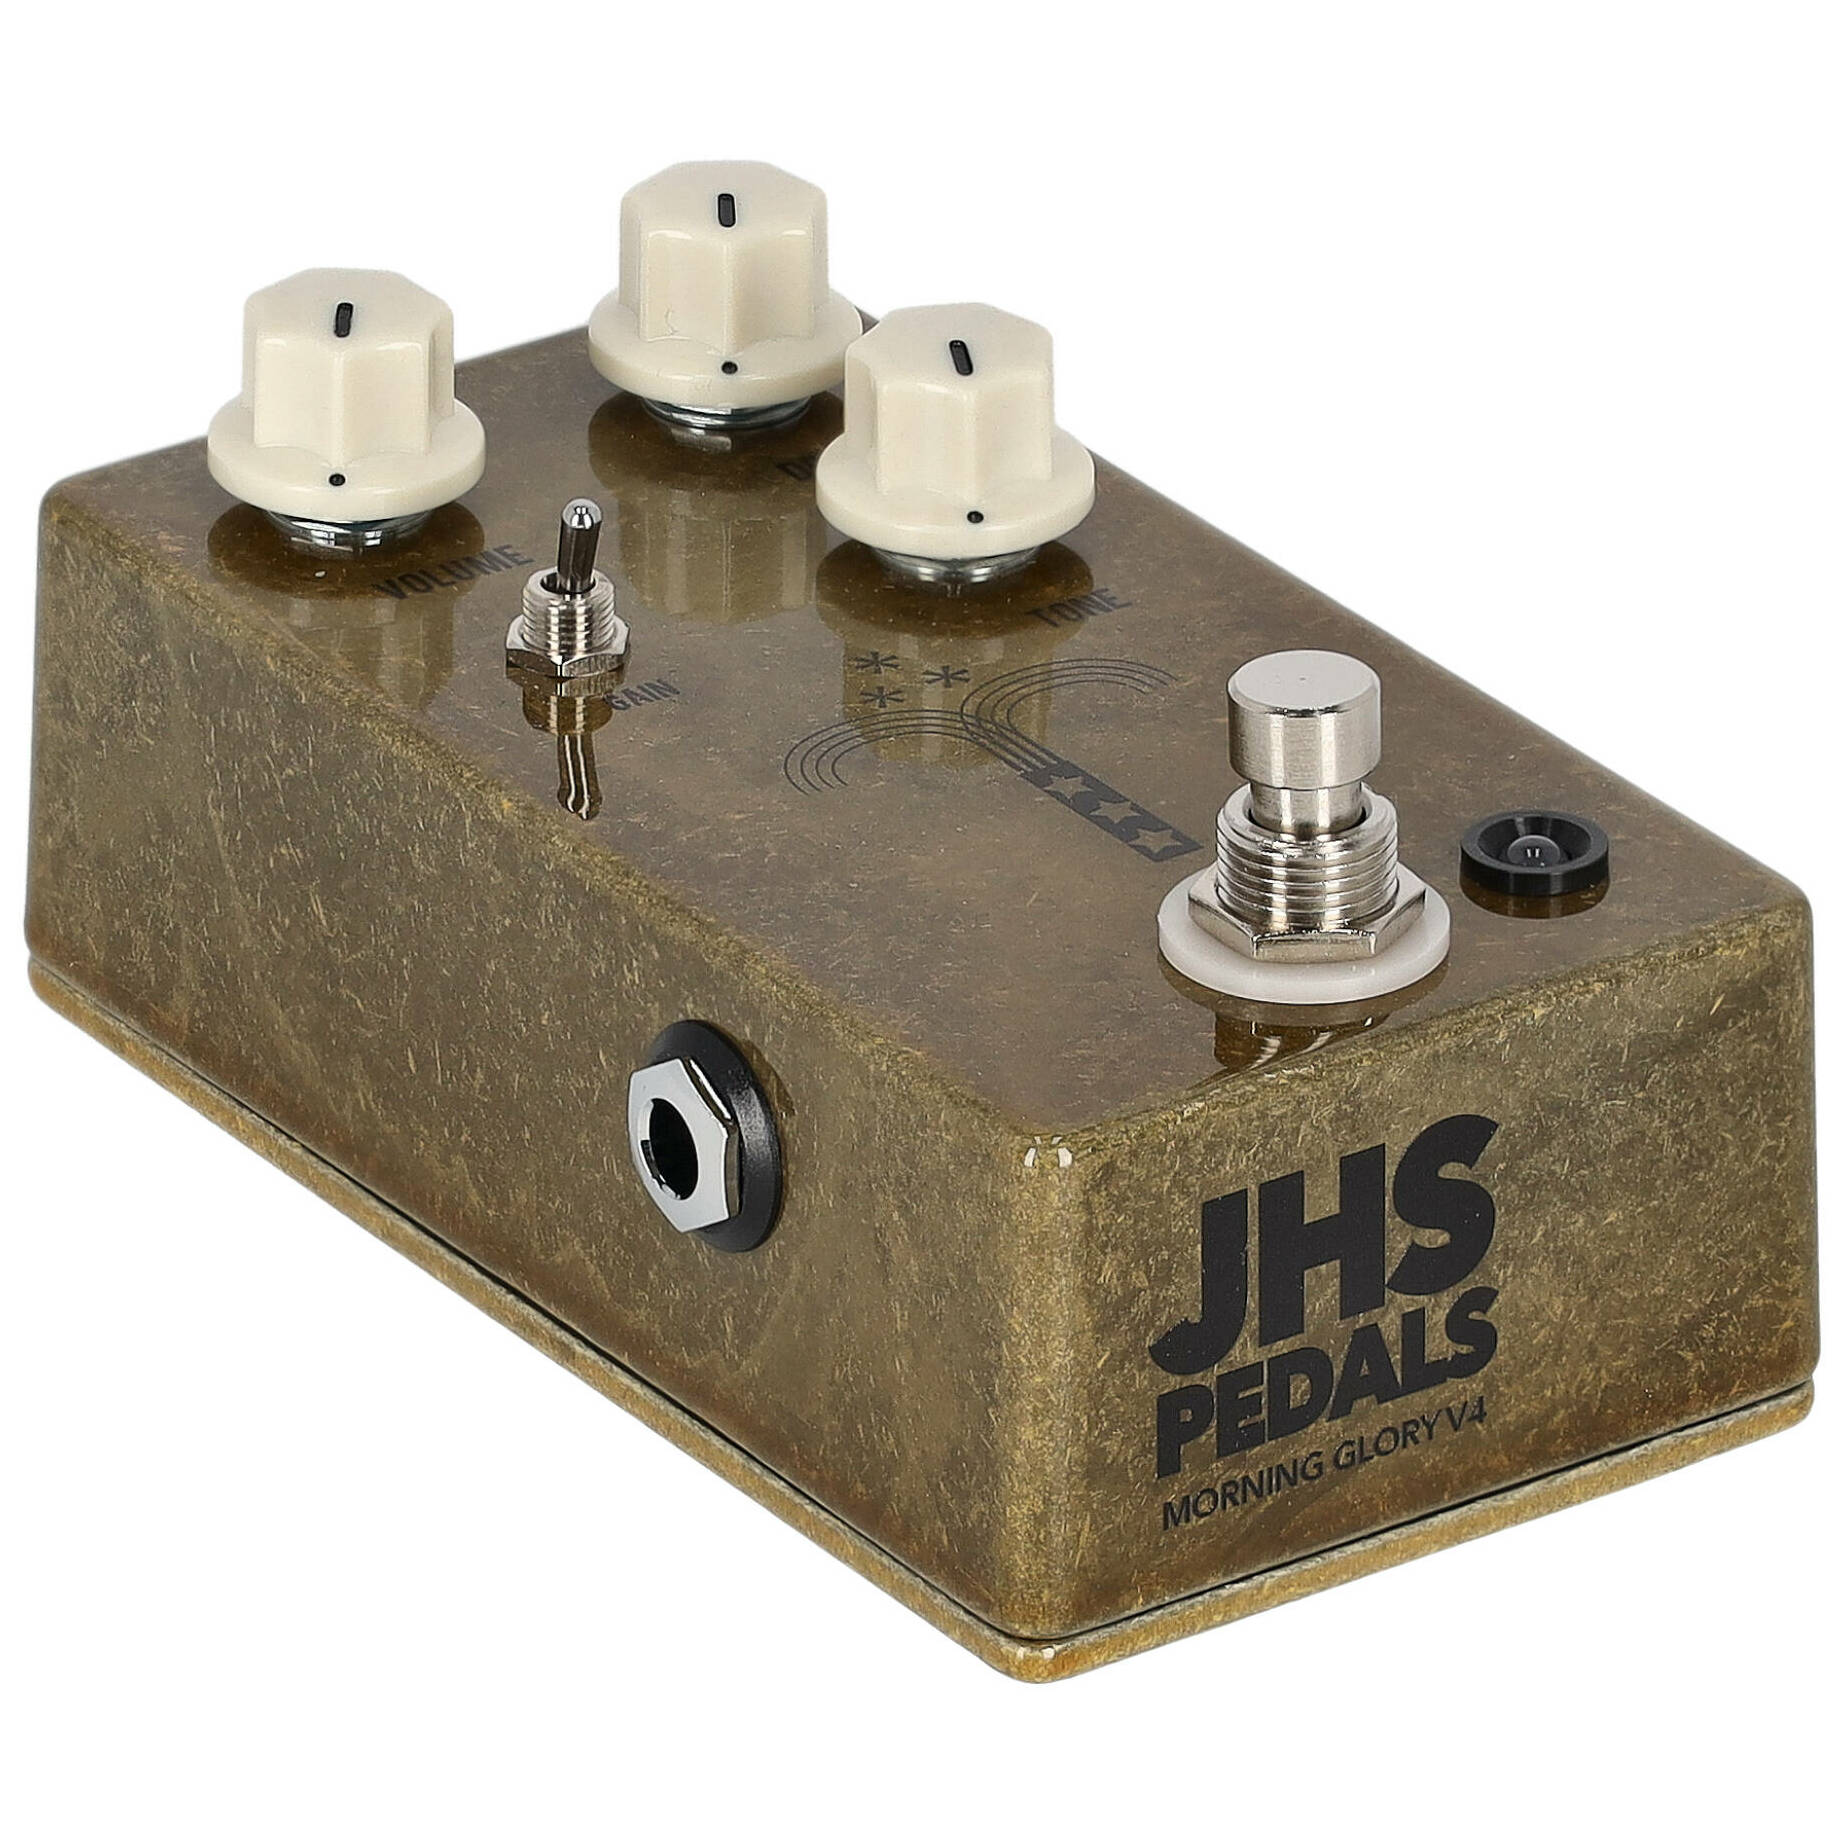 JHS Pedals Morning Glory V4 - Overdrive 2